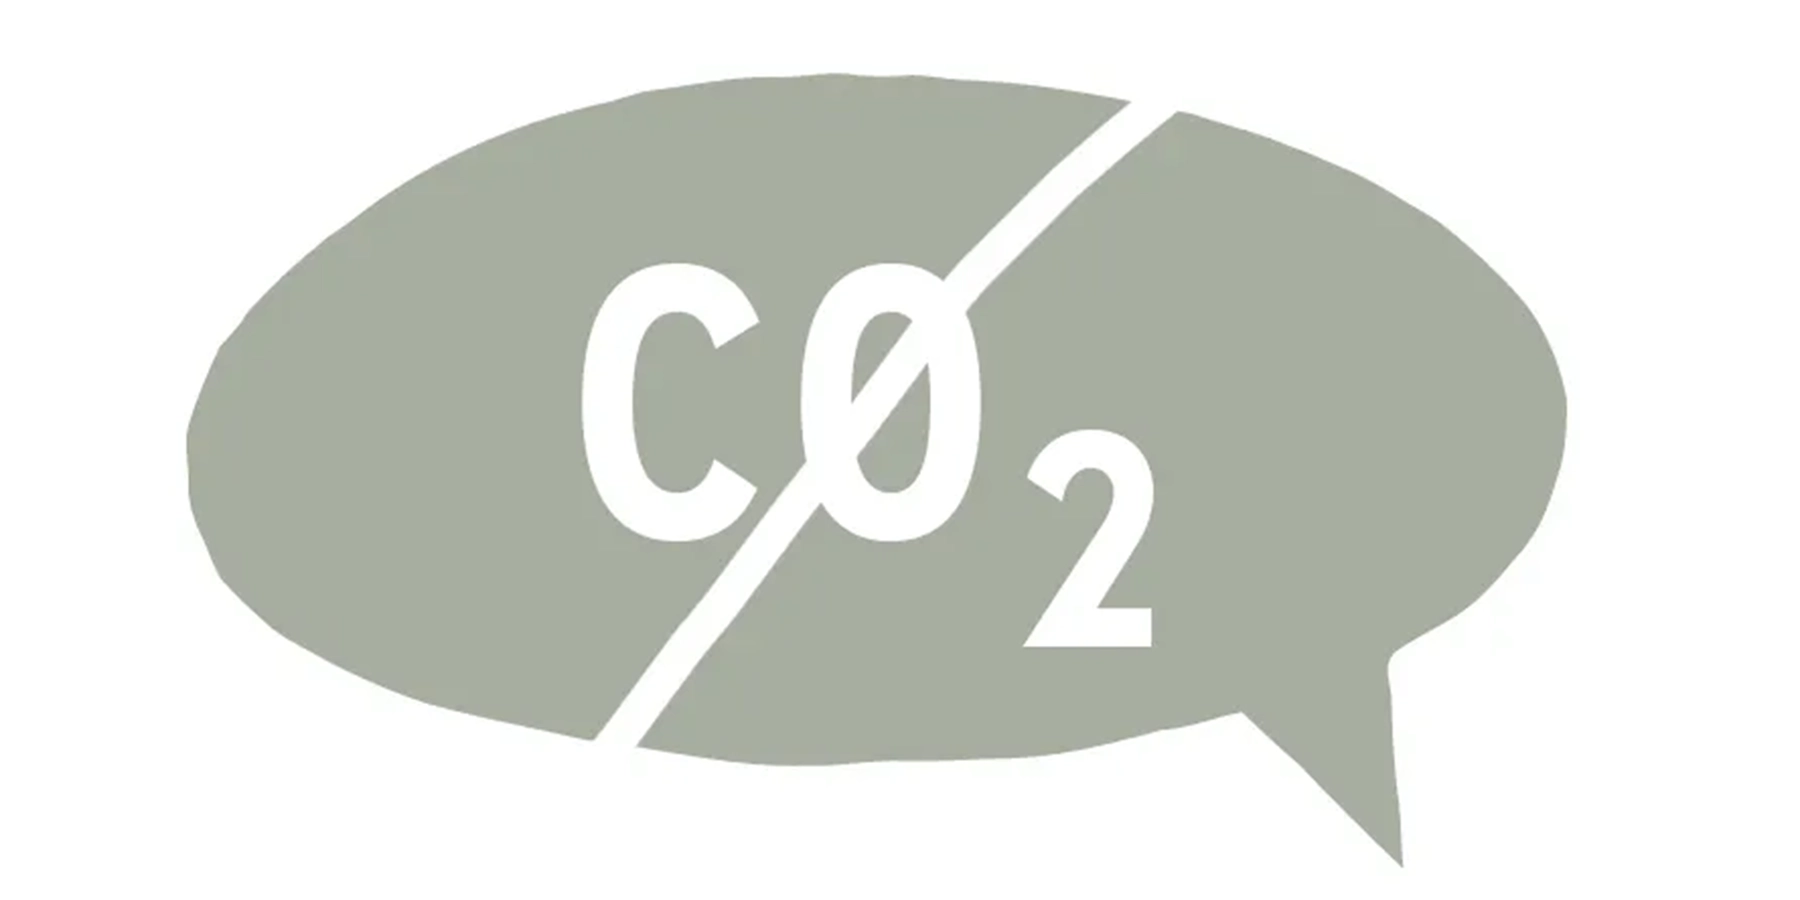 THE DOWN & DIRTY ON BECOMING CARBON NEUTRAL